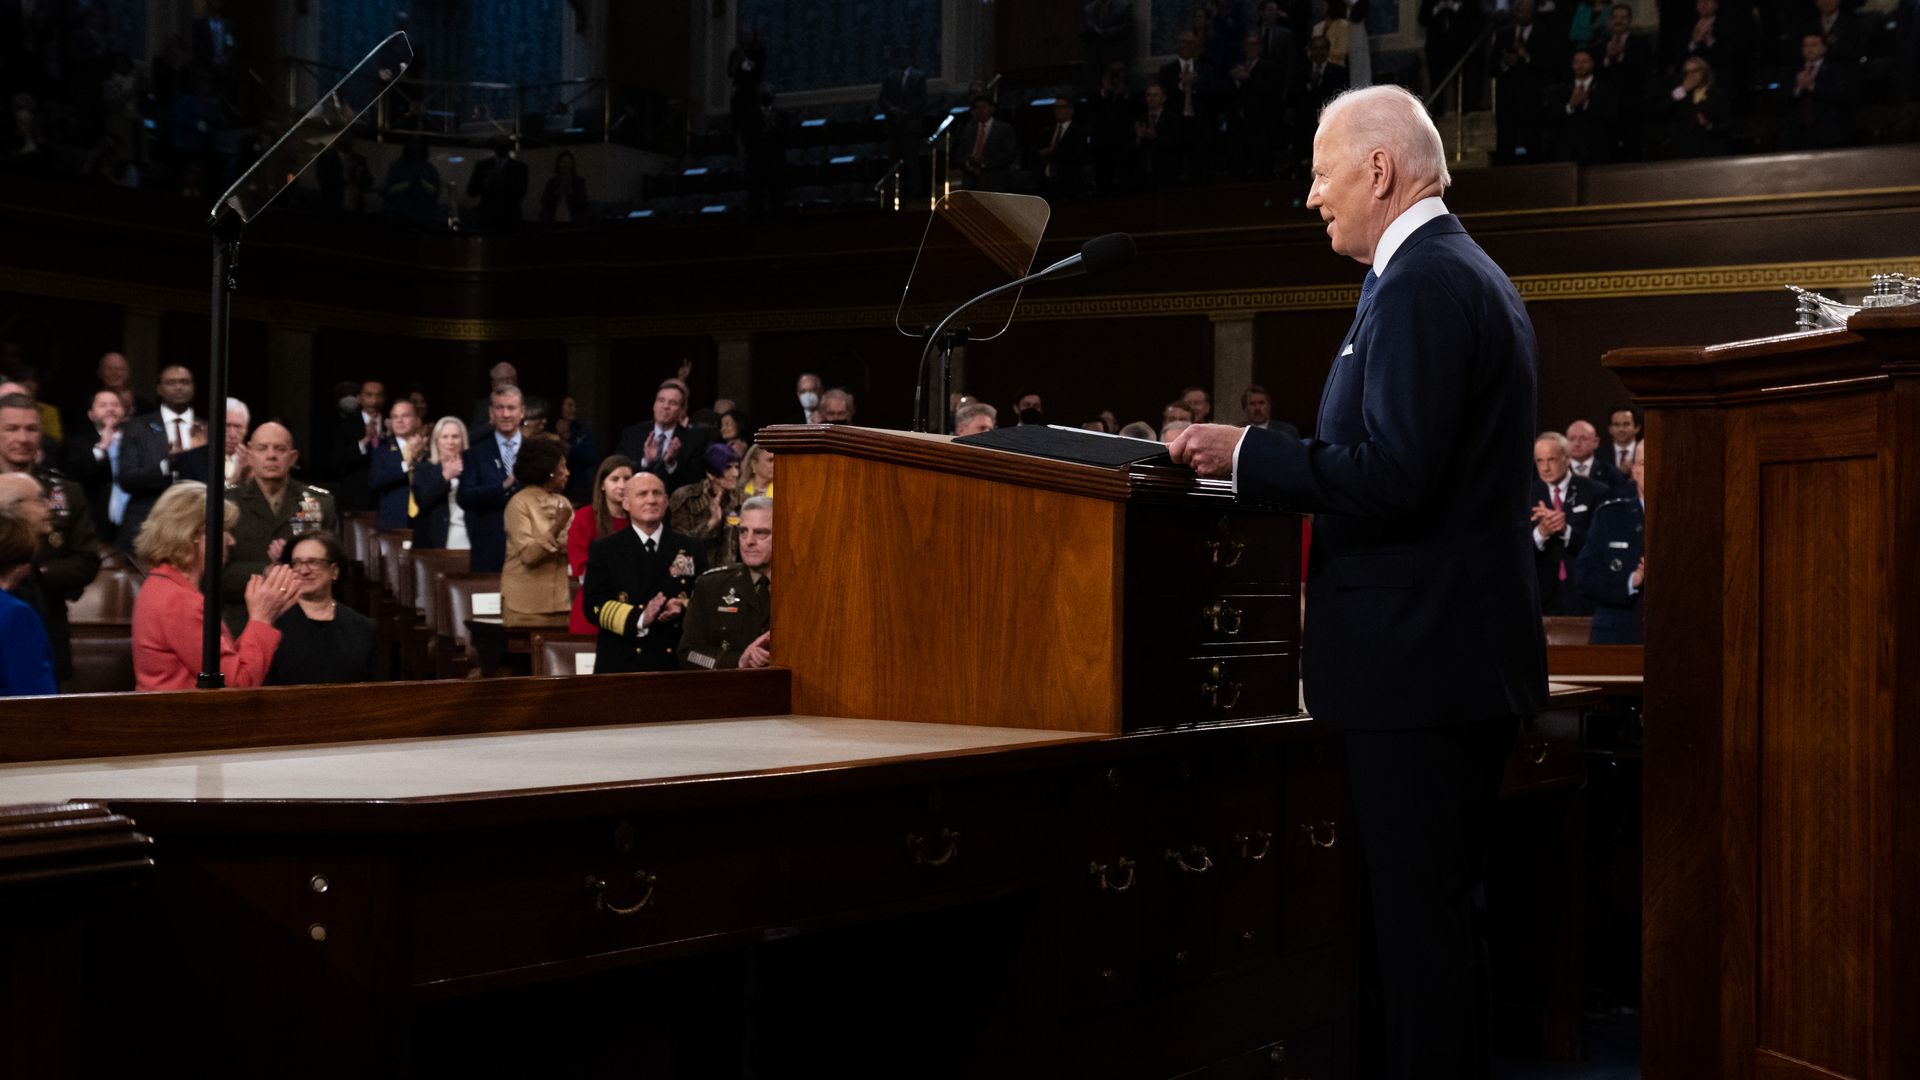 President Joe Biden at the State of the Union address in 2022.